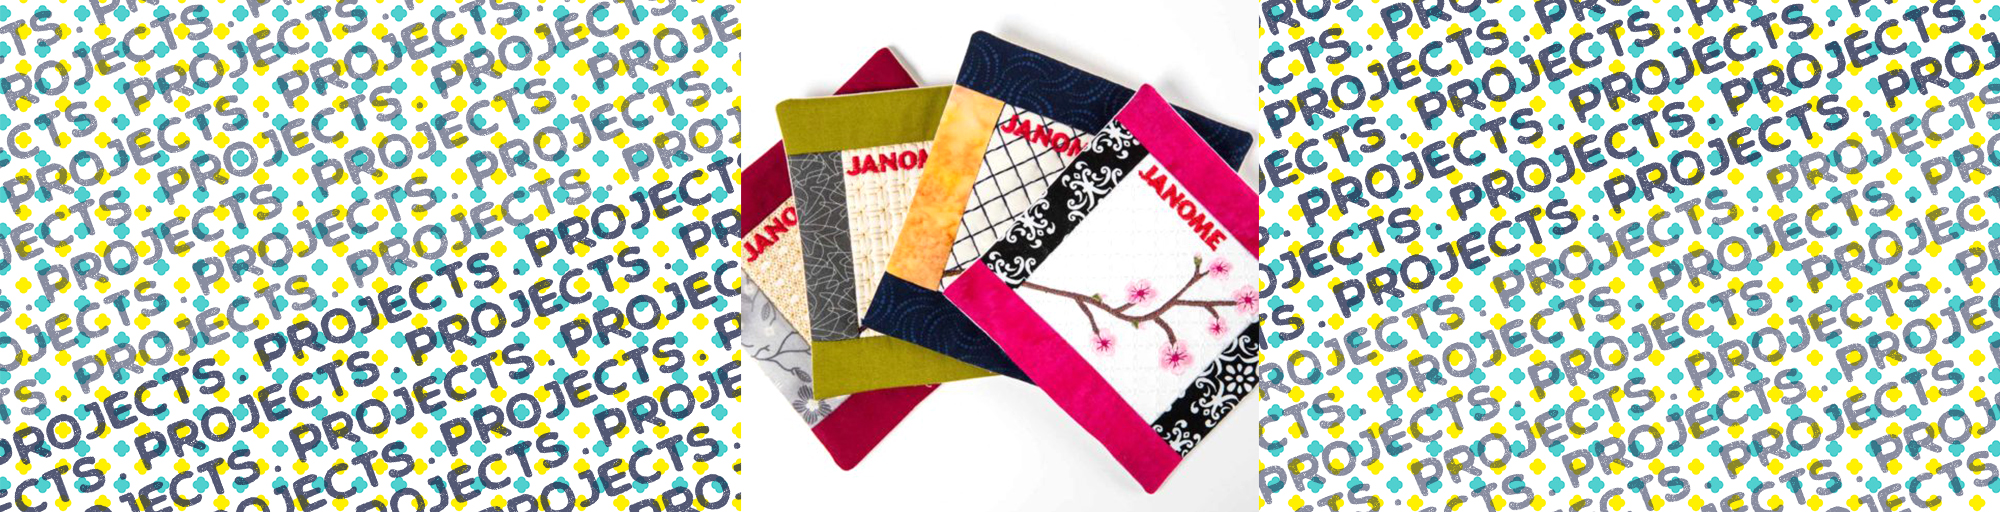 janome sewing project coasters